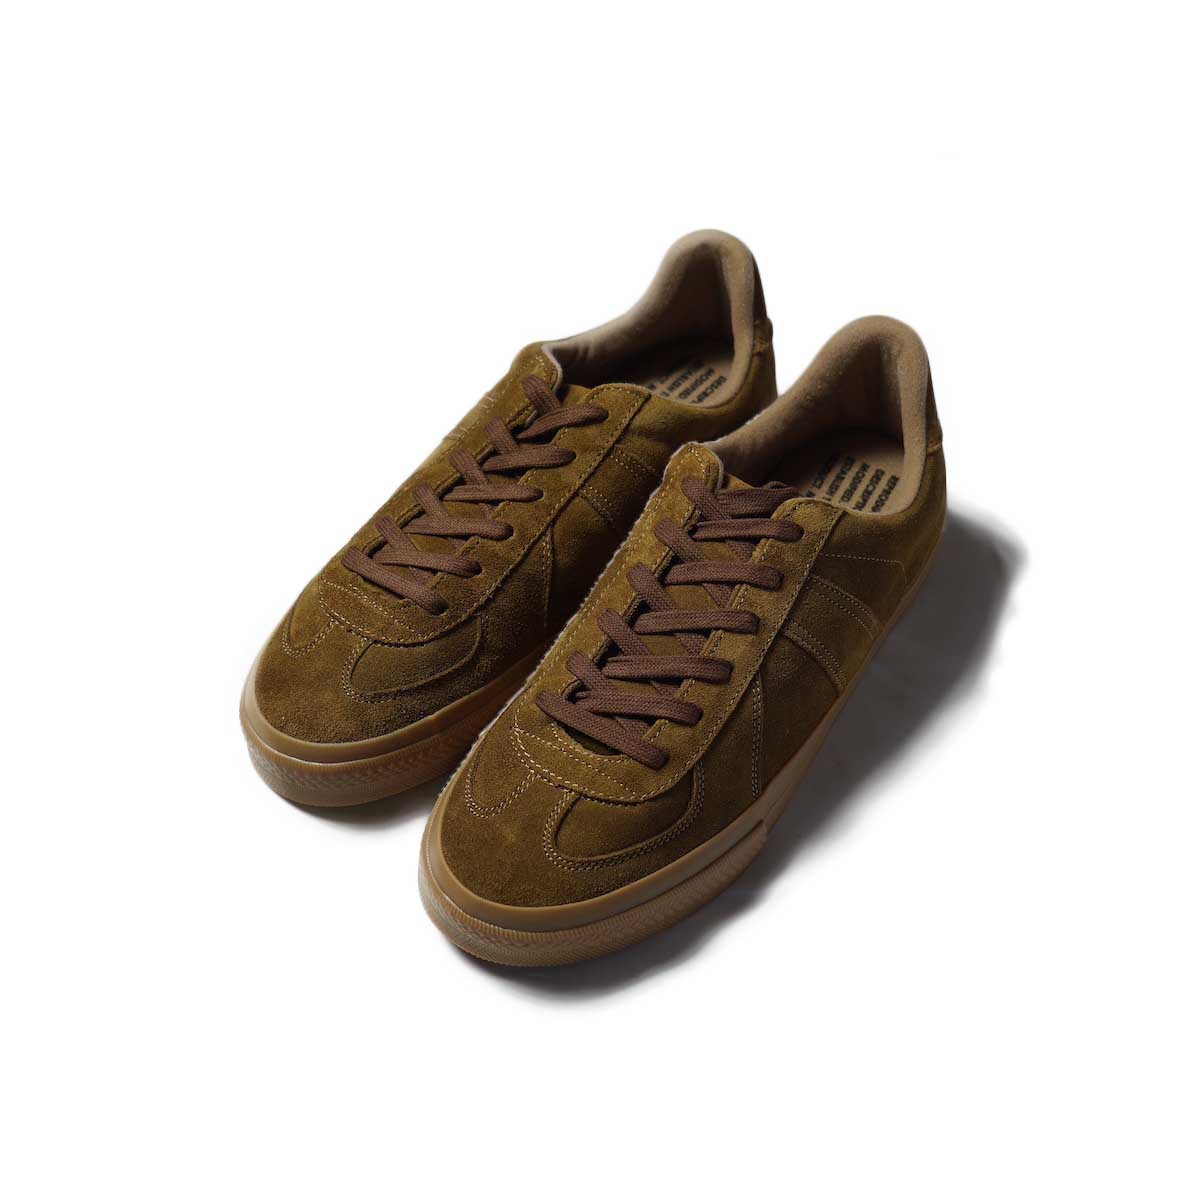 REPRODUCTION OF FOUND / GERMAN MILITARY TRAINER (Tobacco Suede)